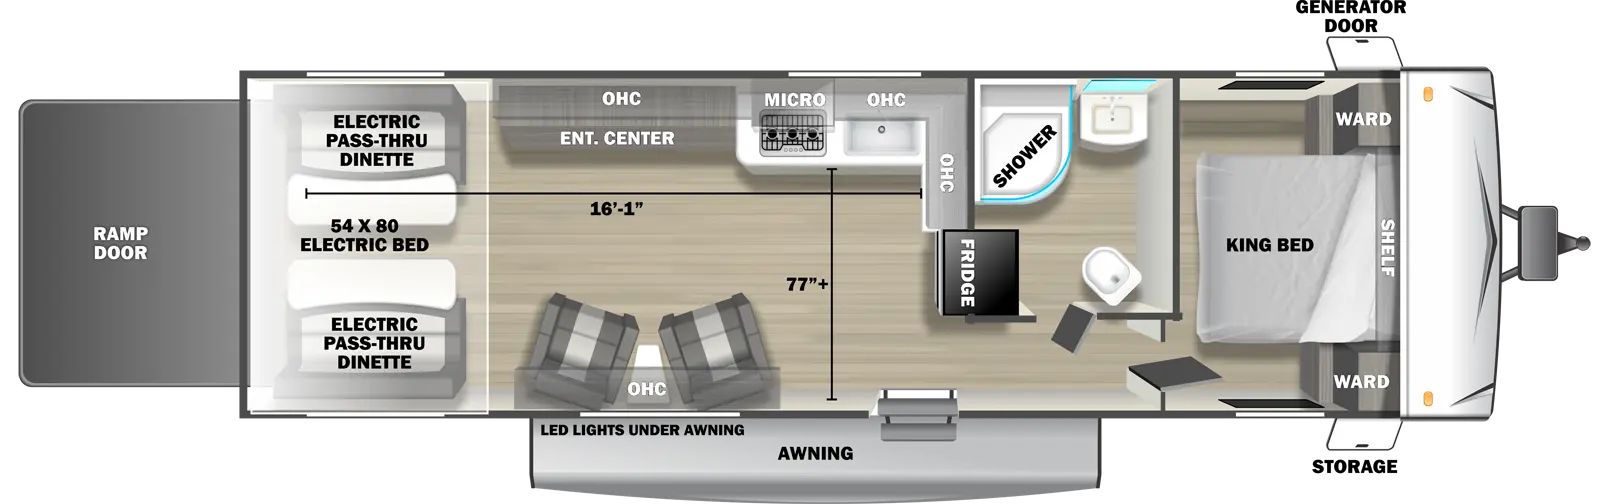 The 2730RLX travel trailer has no slide outs, 1 entry door and 1 rear ramp door. Exterior features include an awning with LED lights, front door side storage and front off-door side generator door. Interior layout from front to back includes: front bedroom with foot-facing King bed, shelf over the bed, and front corner wardrobes; off-door side bathroom with shower, linen storage, toilet and single sink vanity; off-door side kitchen with L-shaped countertop, overhead microwave, overhead cabinets, sink and rear facing refrigerator; door side overhead cabinet over 2 recliners with end table; off-door side entertainment center with overhead cabinet; and rear 54 x 80 electric bed over electric pass-through dinette. Cargo length from rear of unit to kitchen countertop is 16 ft. 1 in. Cargo width from kitchen countertop to door side wall is 77 inches.